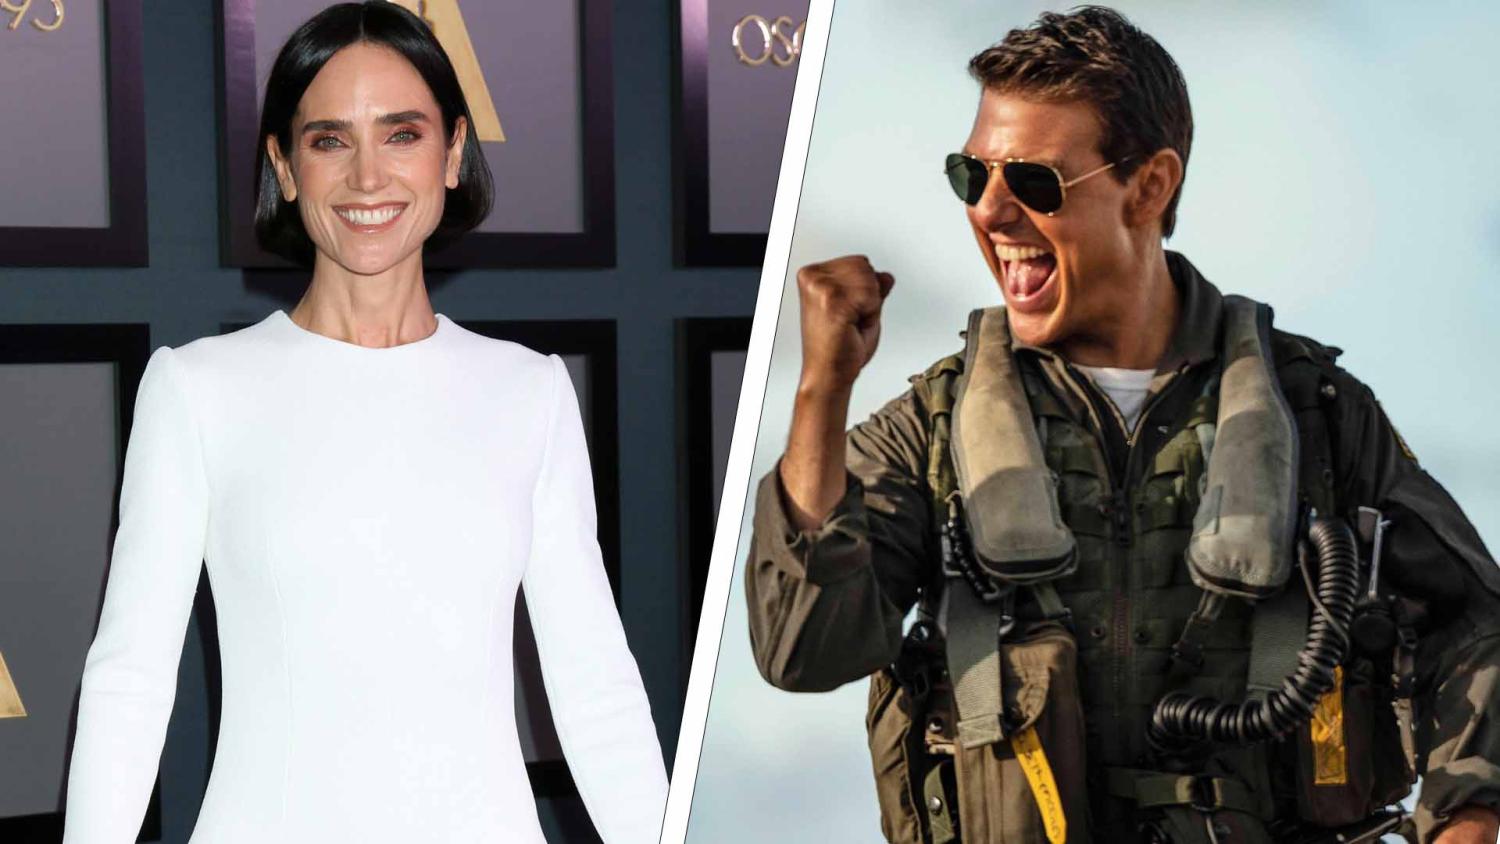 Top Gun: Maverick' Star Jennifer Connelly on Working With Tom Cruise